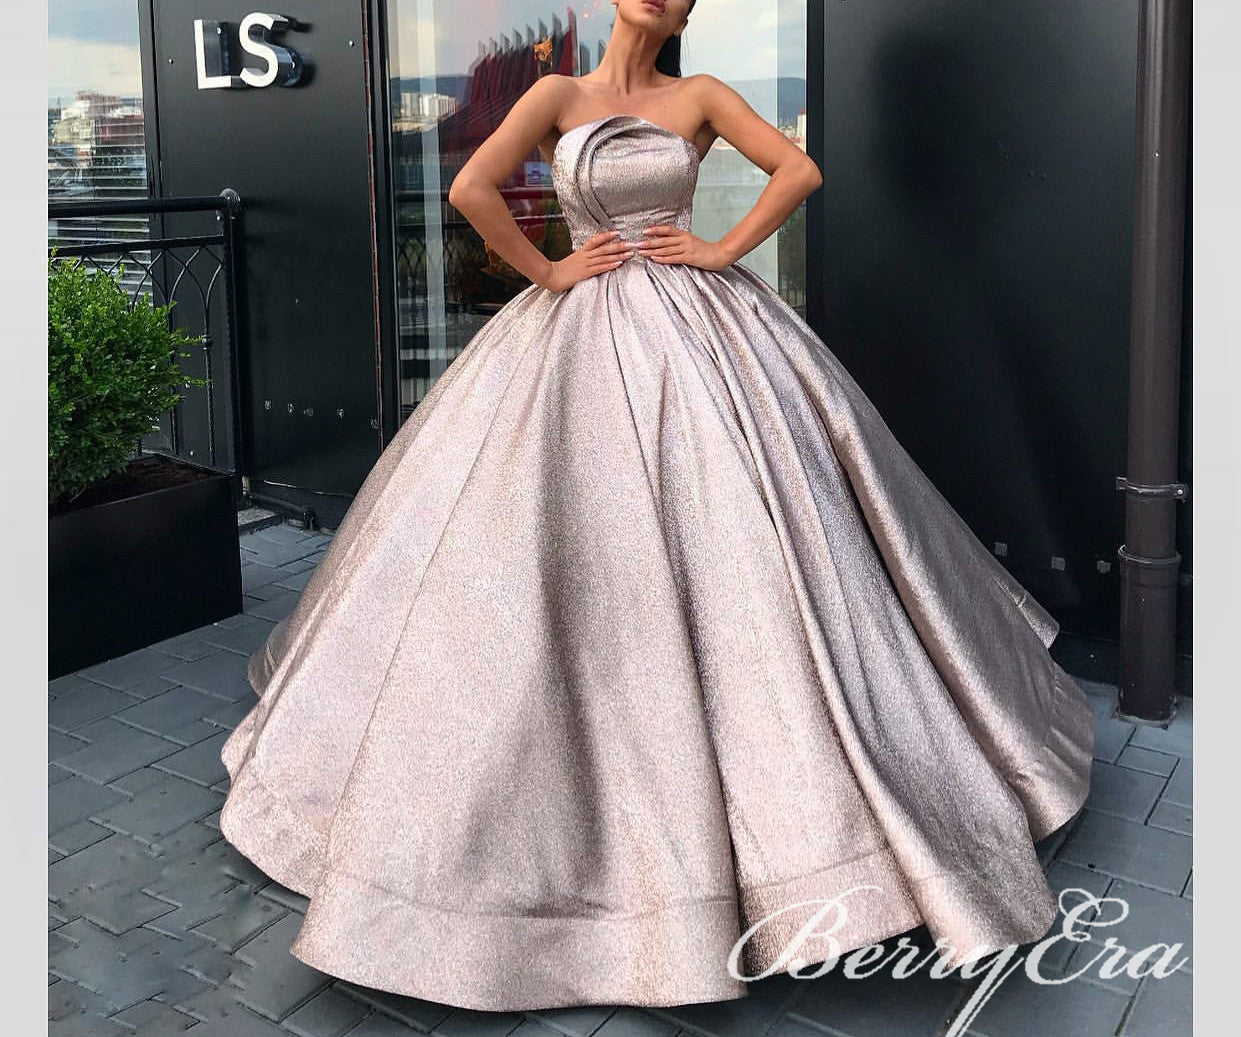 Gorgeous Glitter Long A-line Ball Gown Prom Dresses, Chic Prom Dresses, Popular Prom Dresses